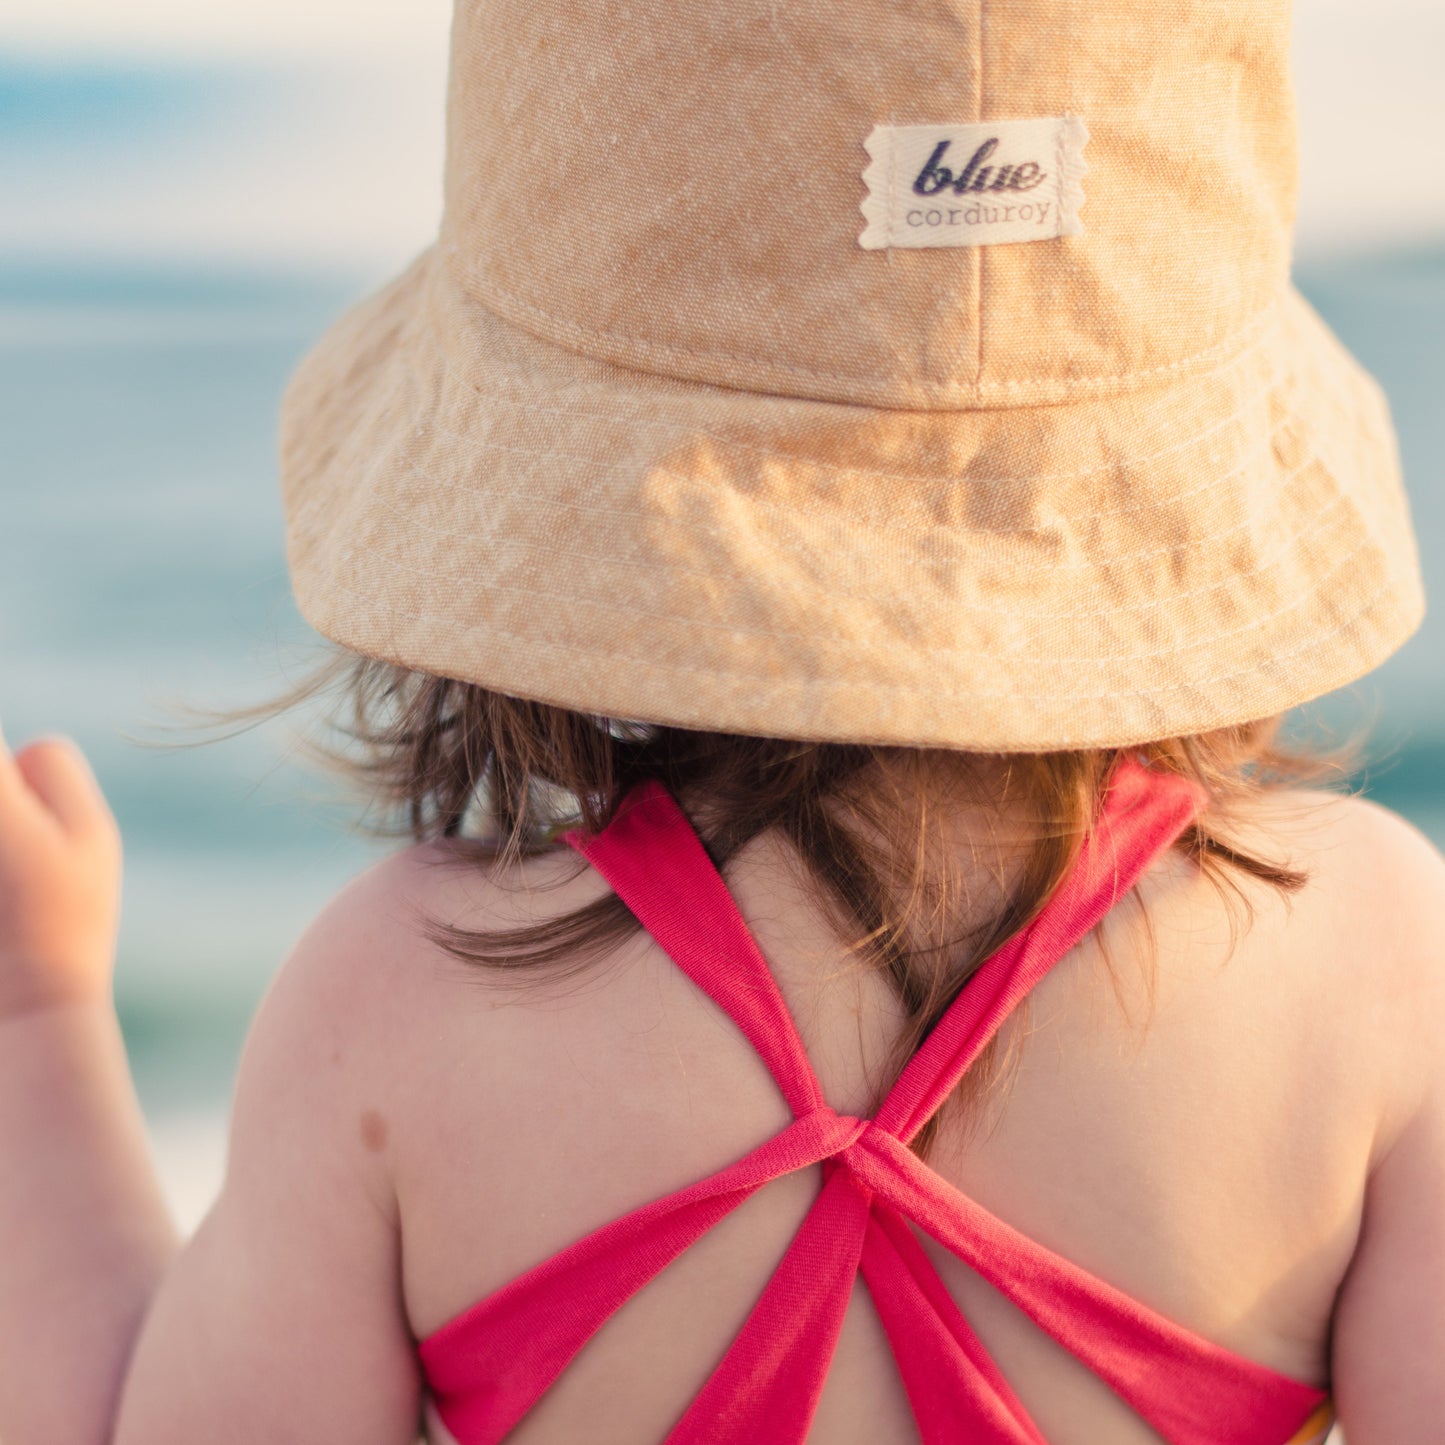 Matching Mommy and Baby Linen Bucket Hat Set - Tan